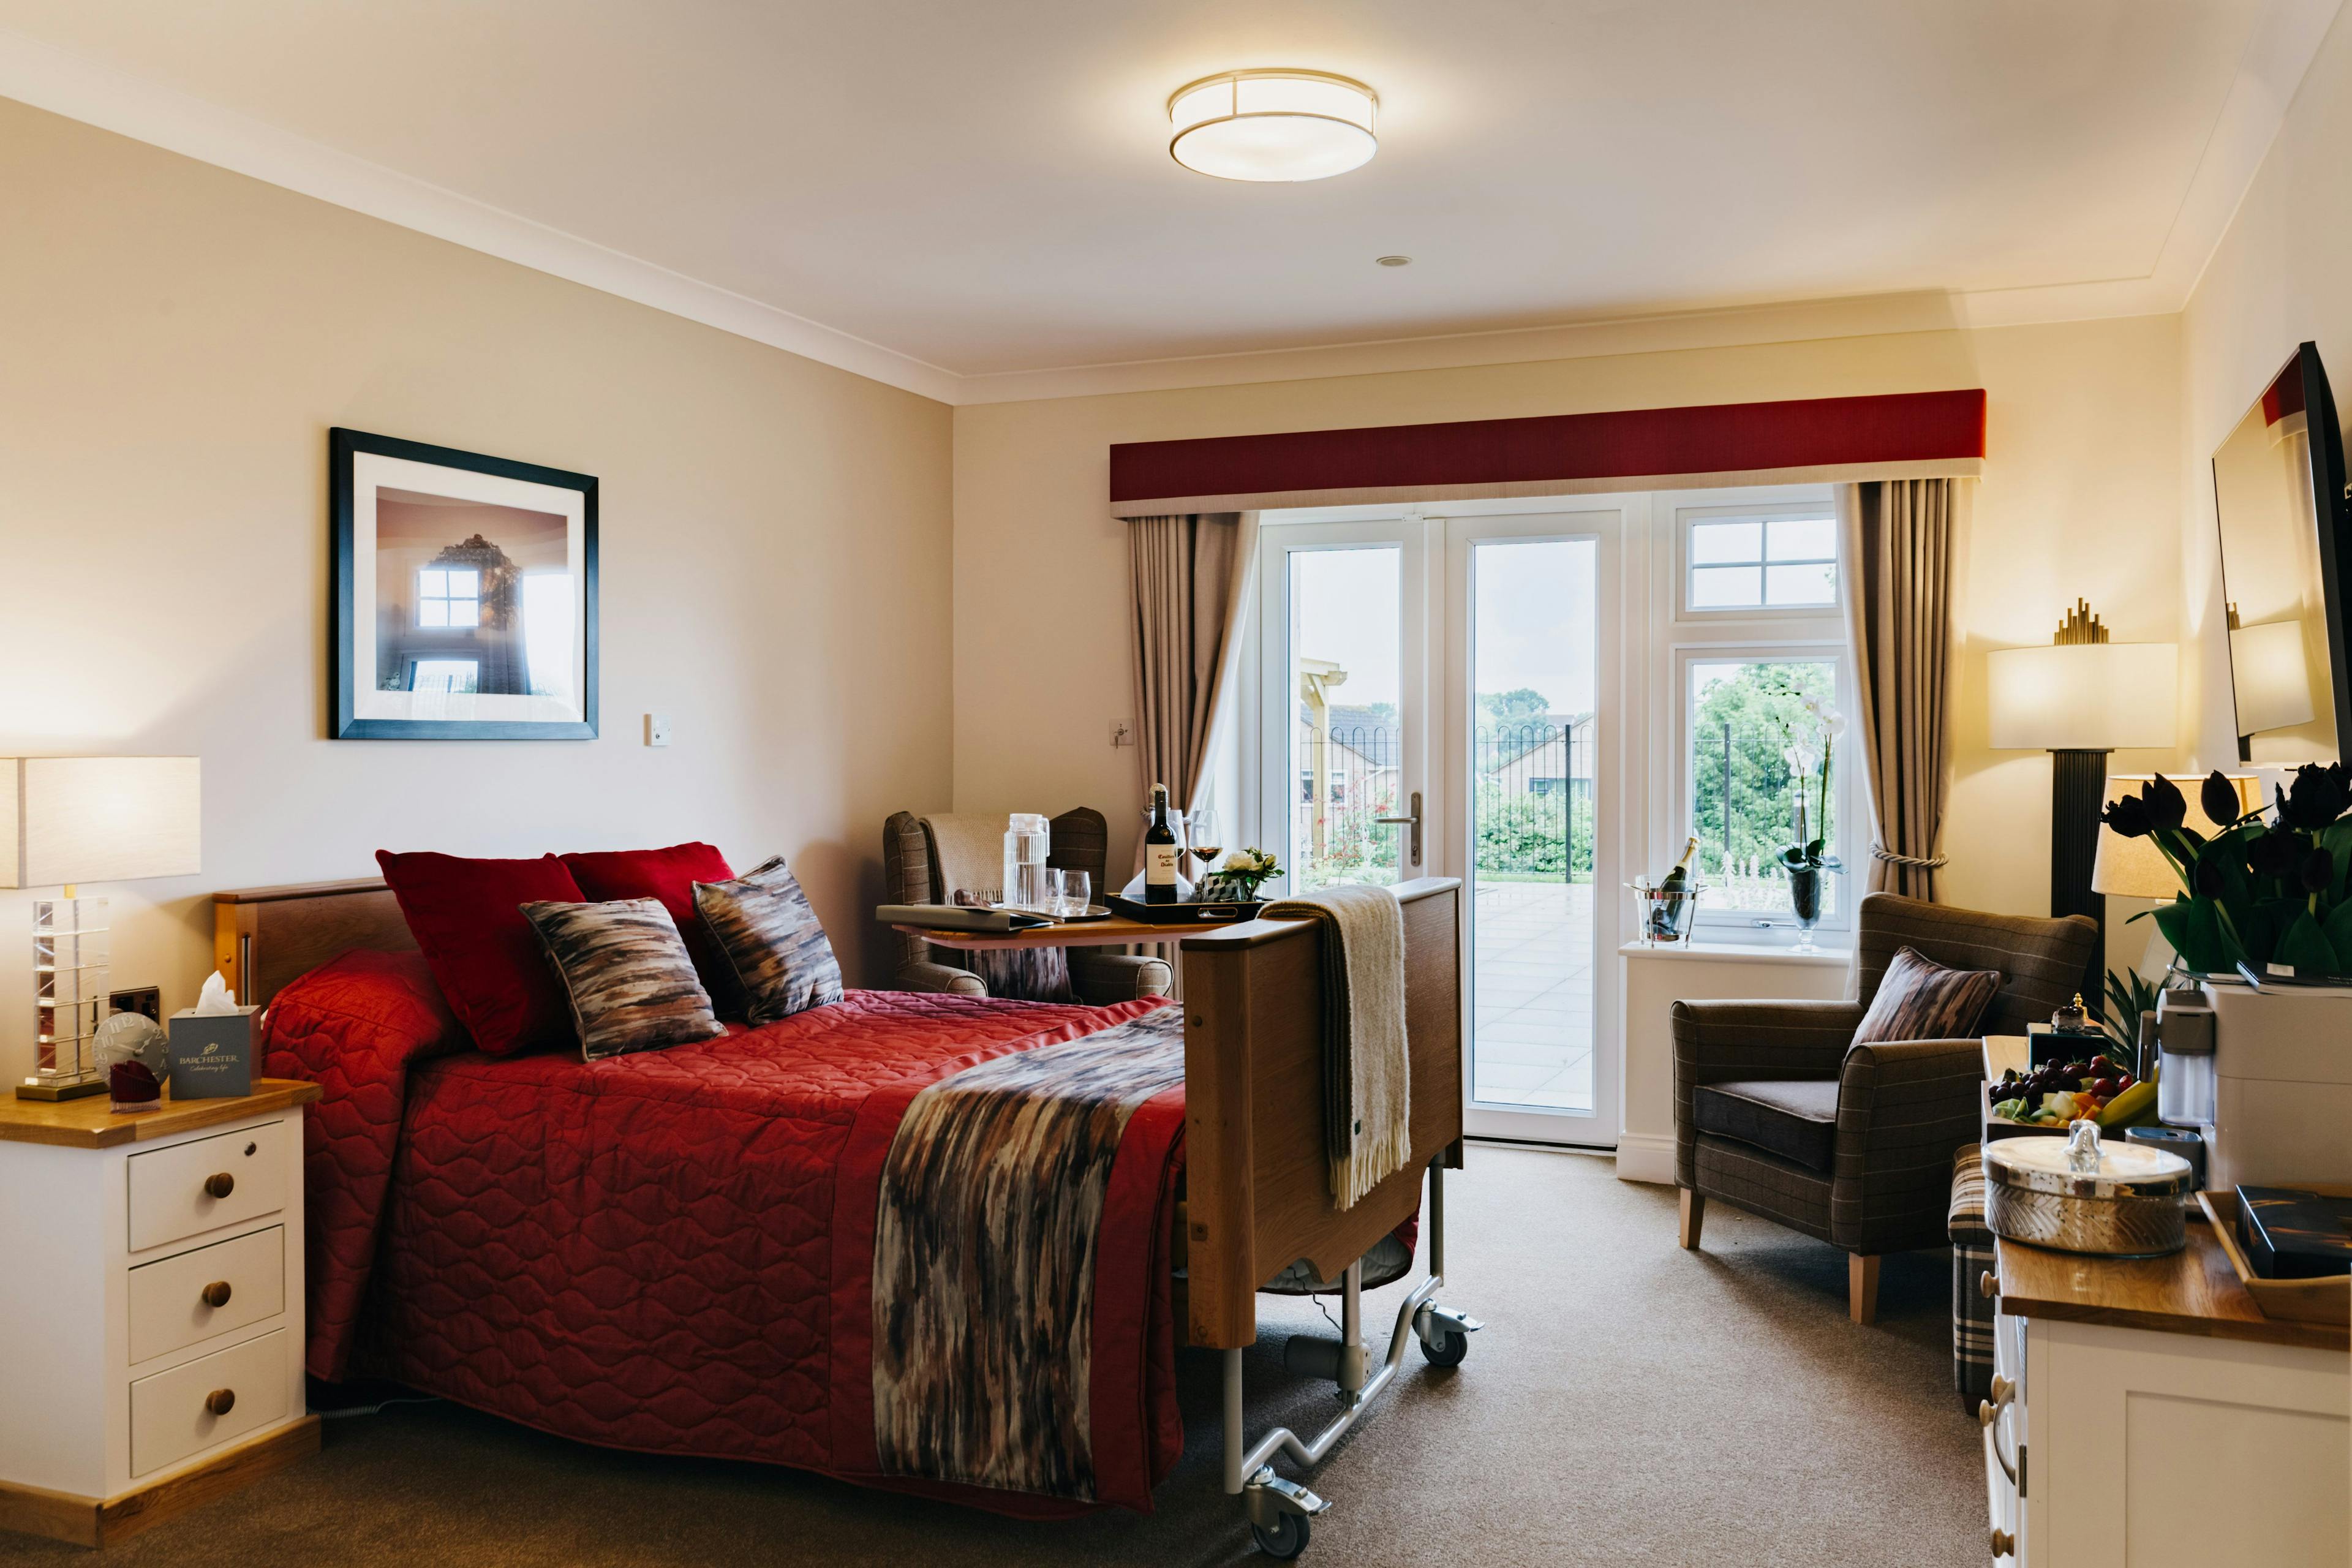 Bedroom at Raleigh Care Home in Exmouth, Devon